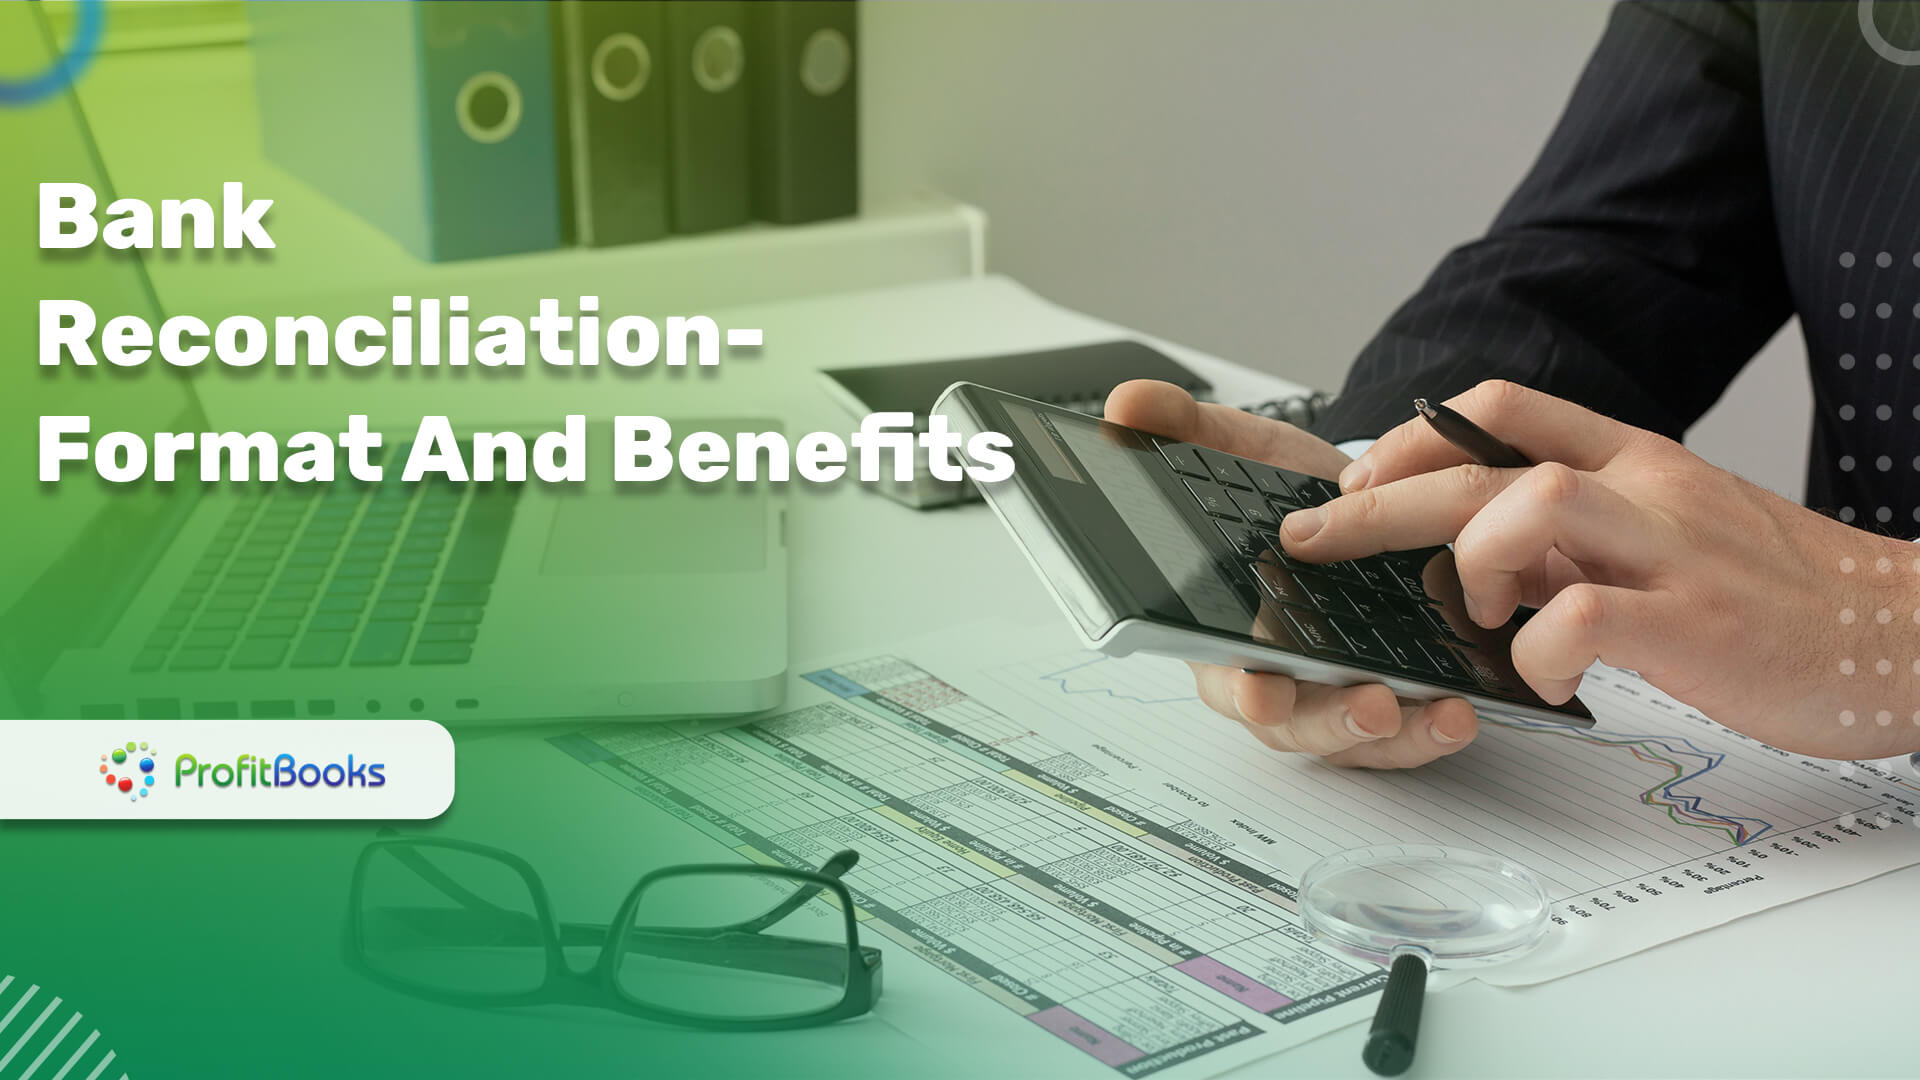 Bank Reconciliation- Format And Benefits